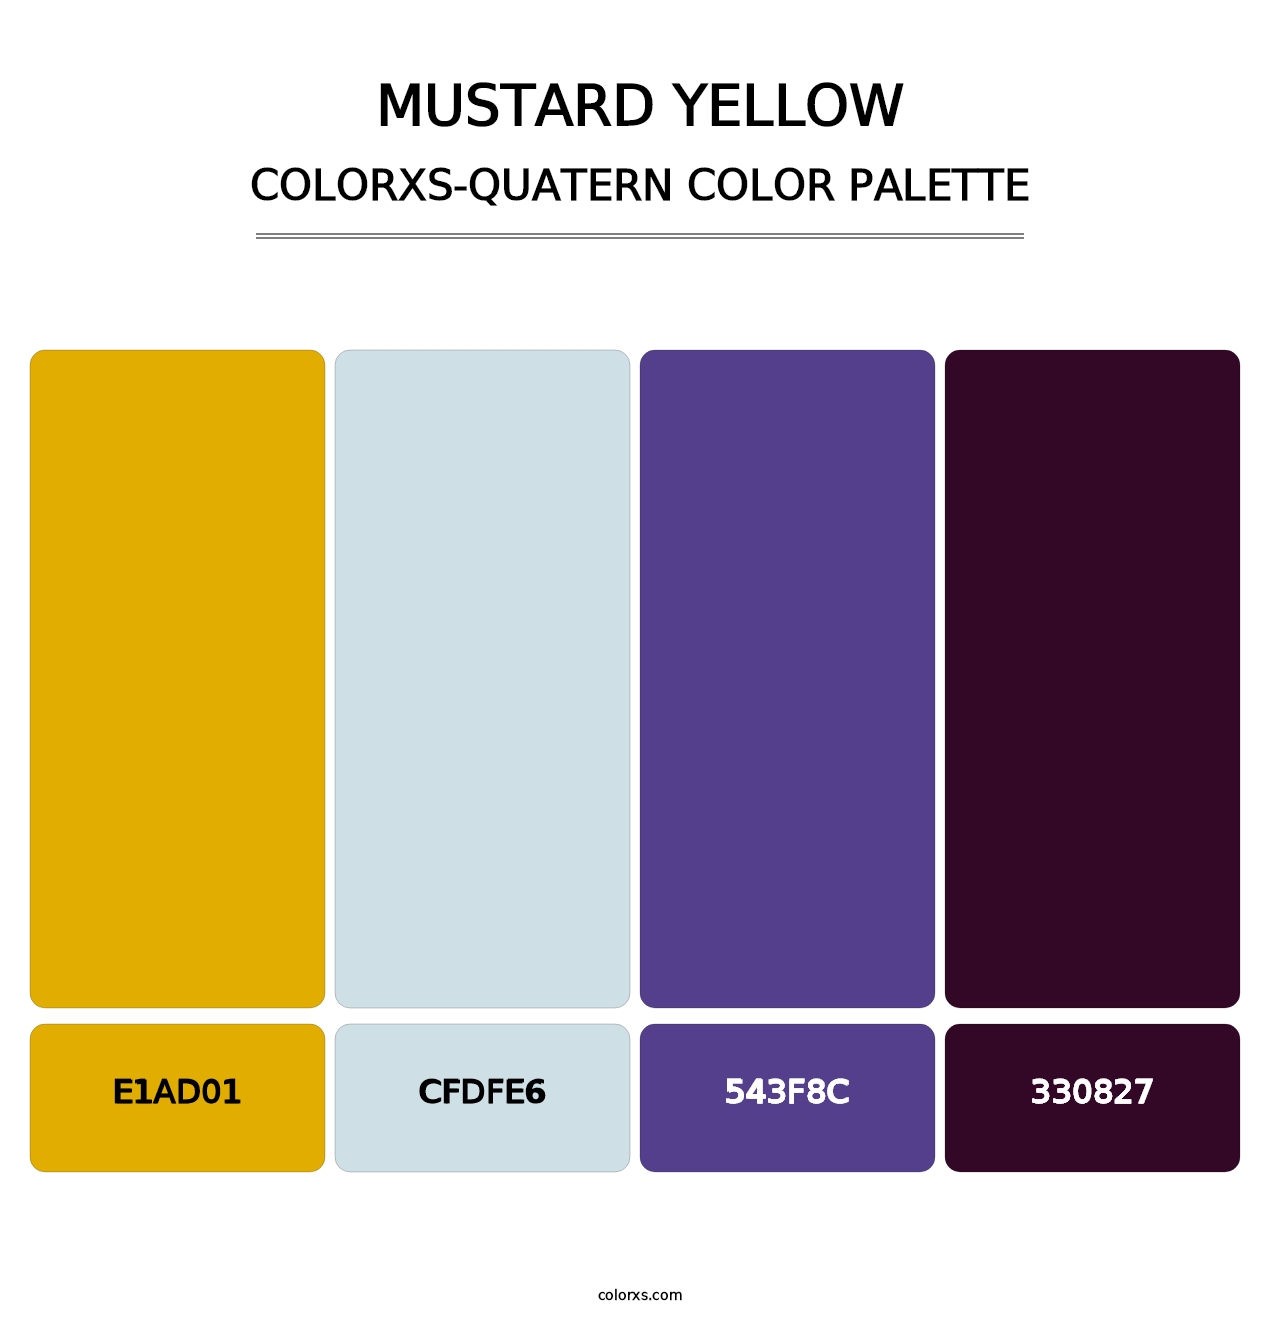 Mustard Yellow - Colorxs Quatern Palette